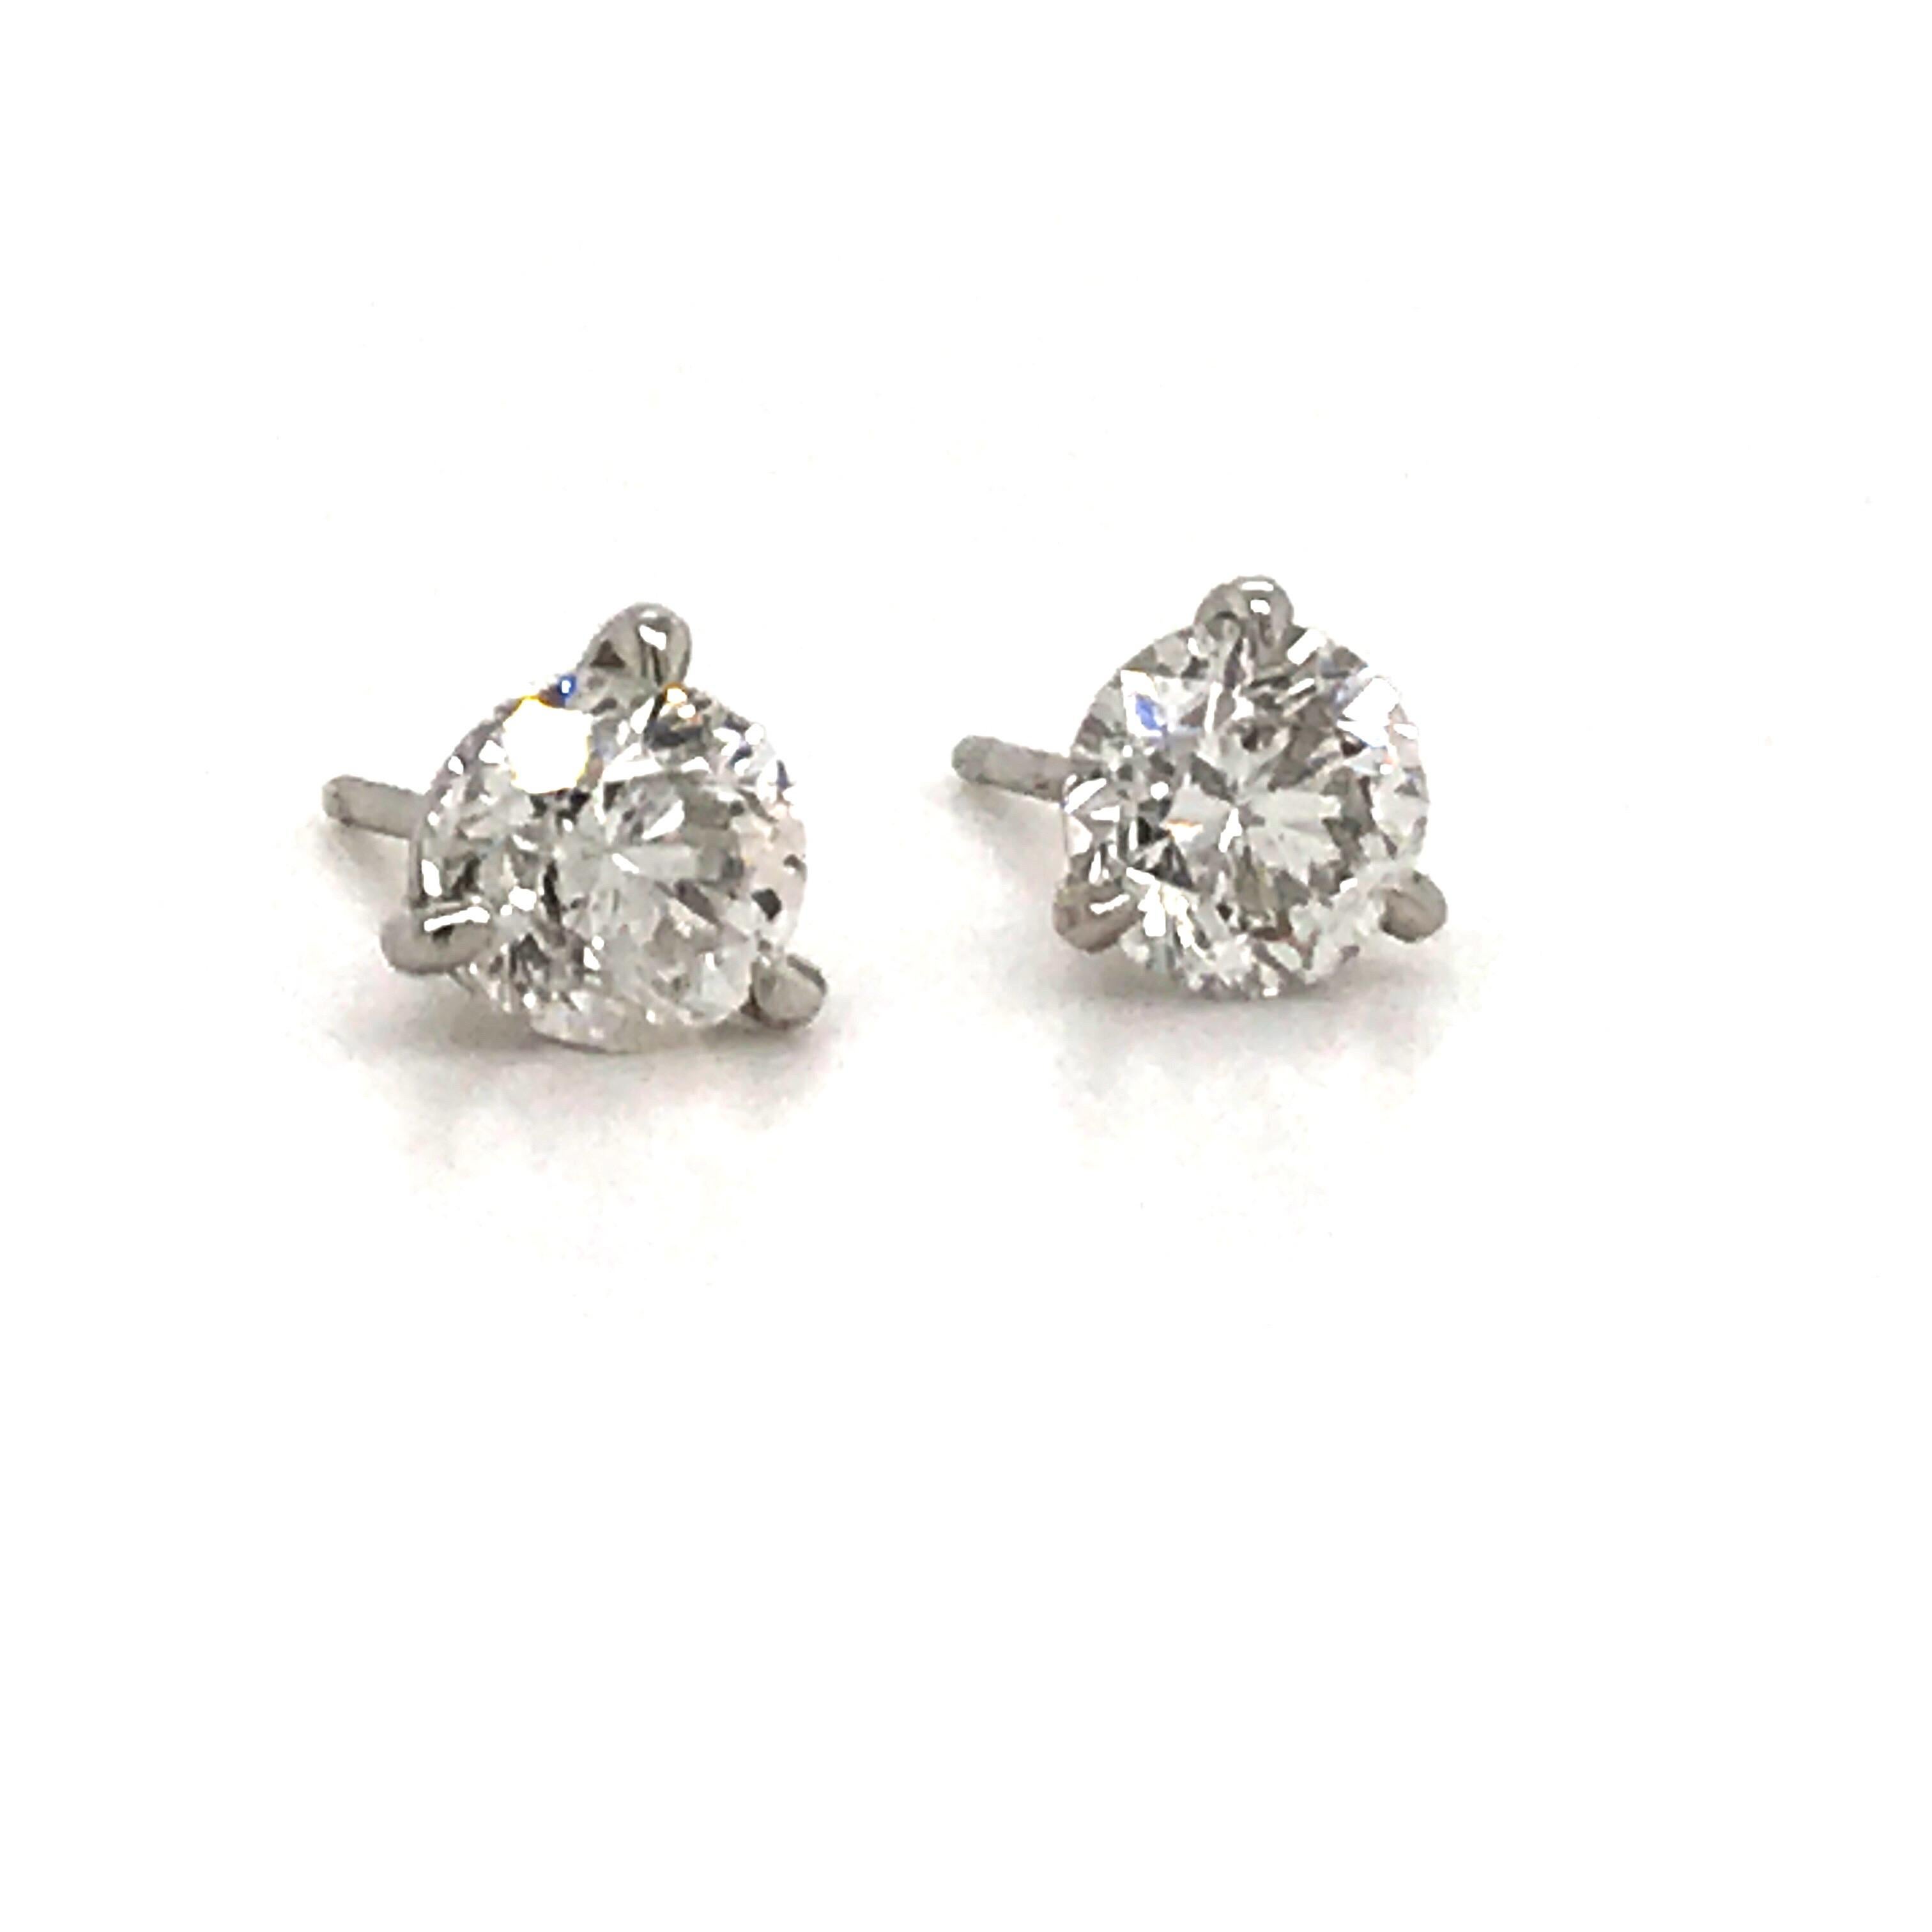 Diamond stud earrings weighing 1.60 carats in a 14k white gold 3 prong martini setting.
Color E-F
Clarity SI2-SI3